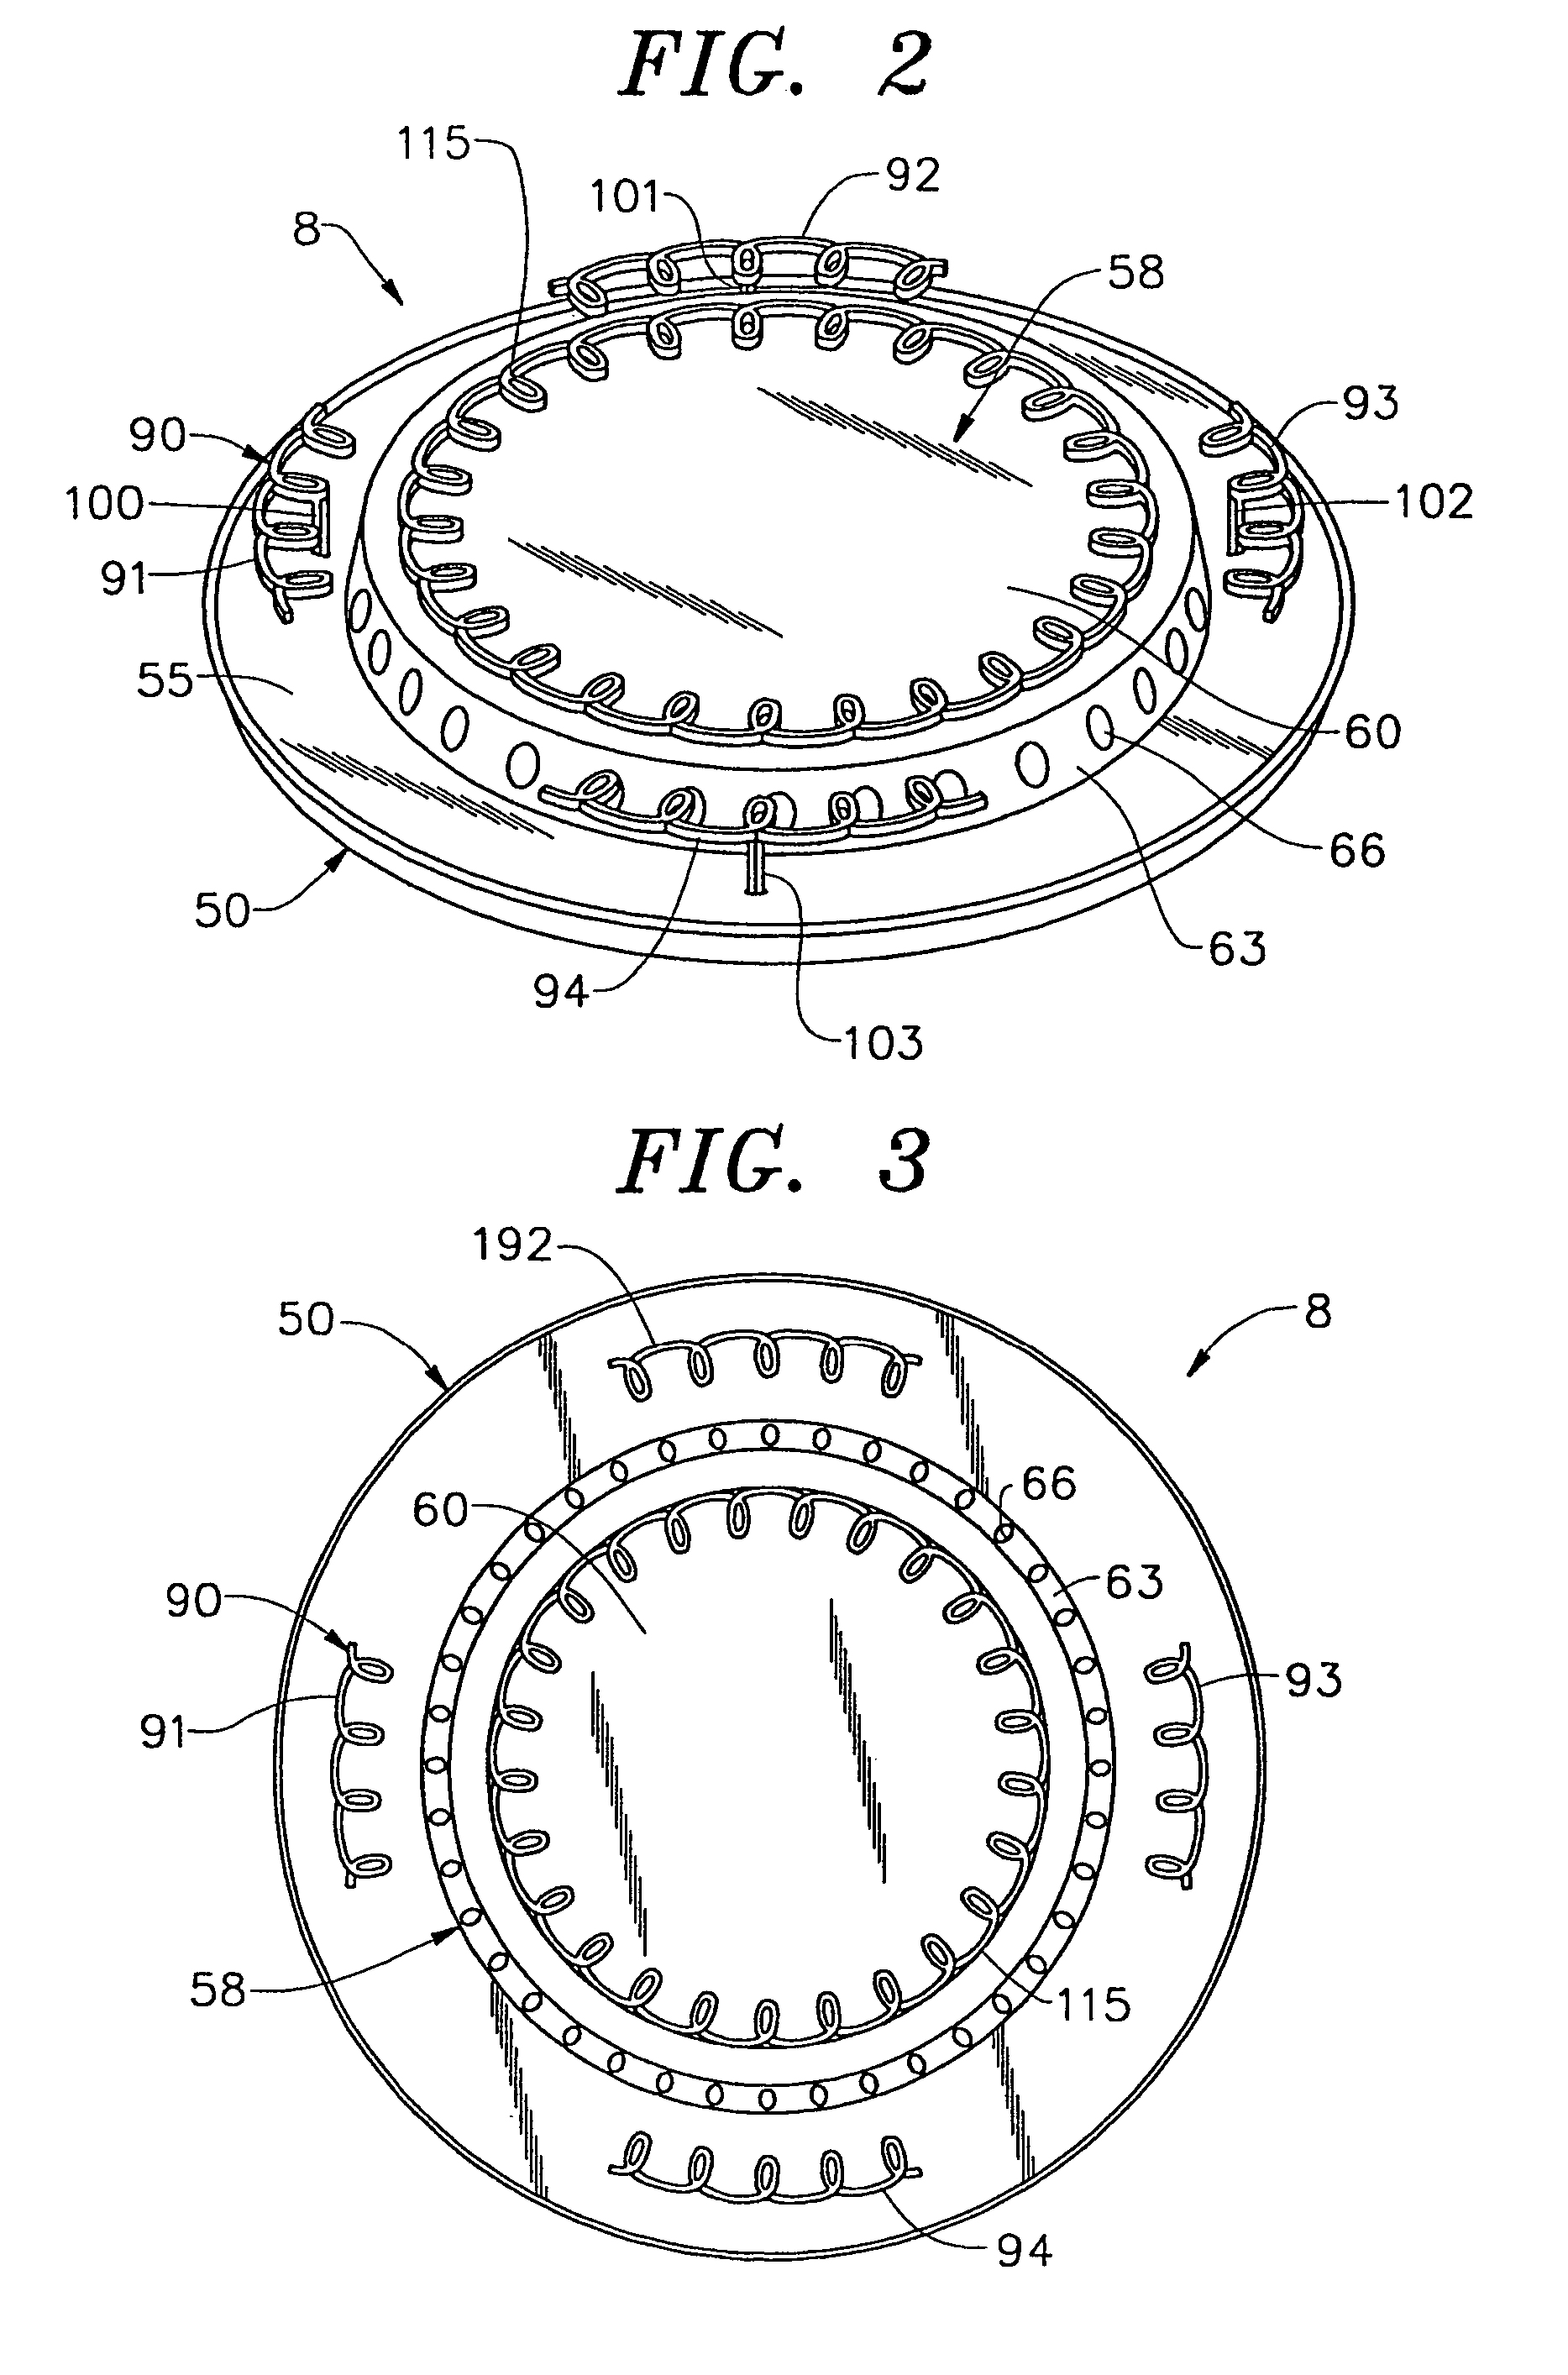 Smooth surface gas cooktop having an electric ignition/turndown system